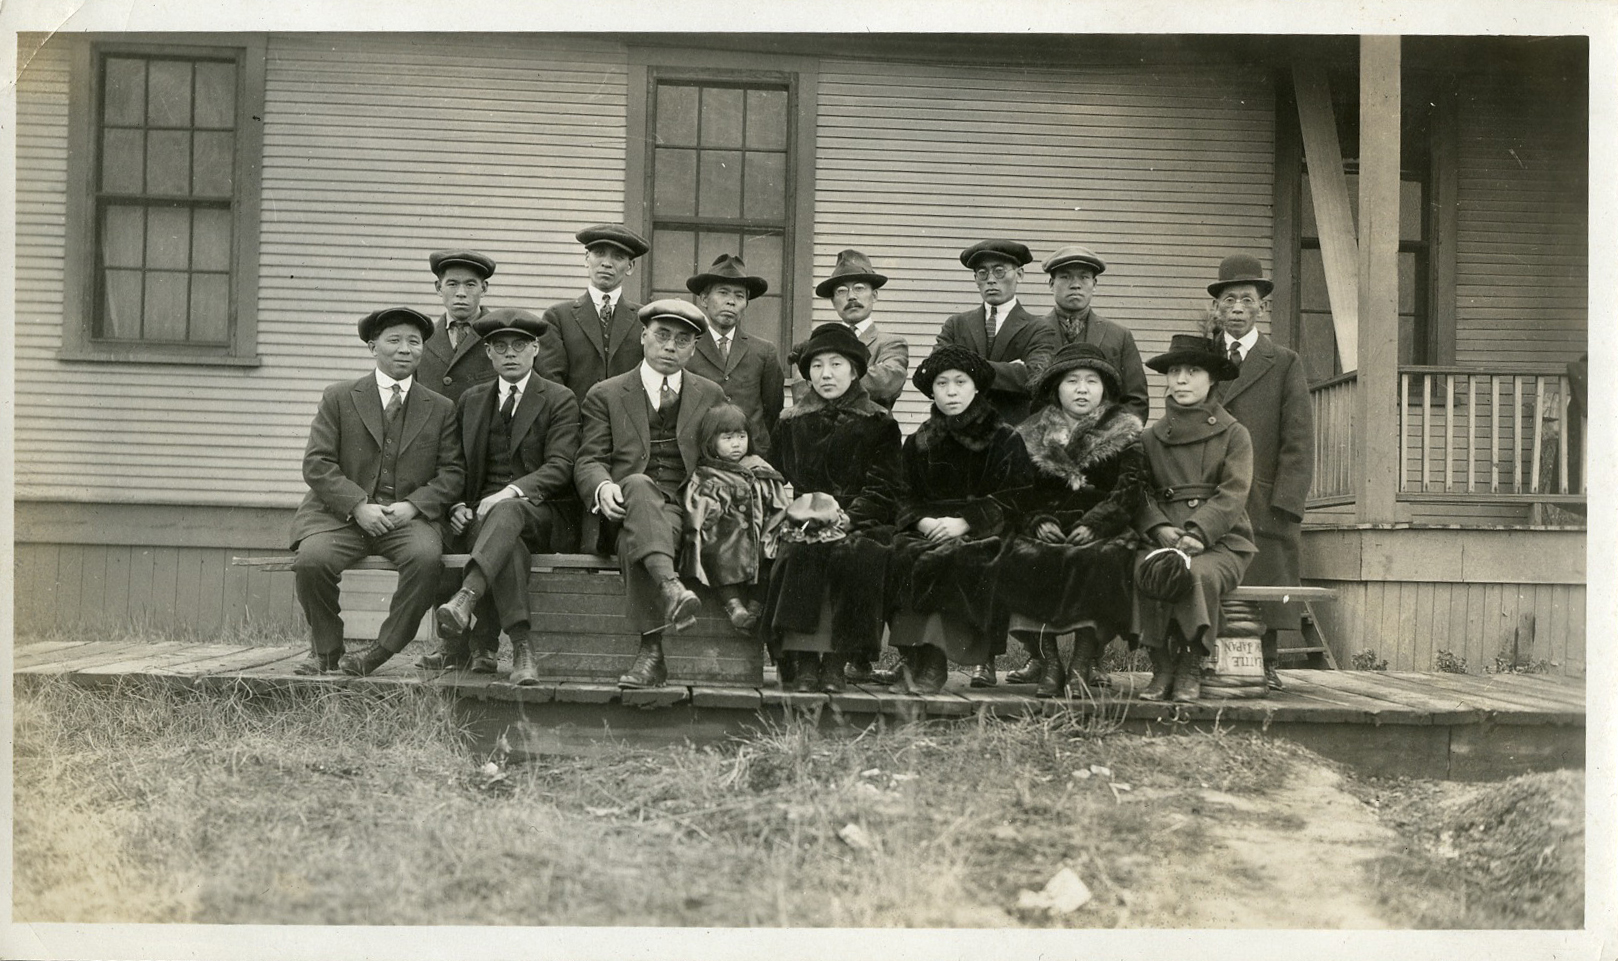 A group of railroad workers with their wives, Whitefish, Mt, ca. 1922.